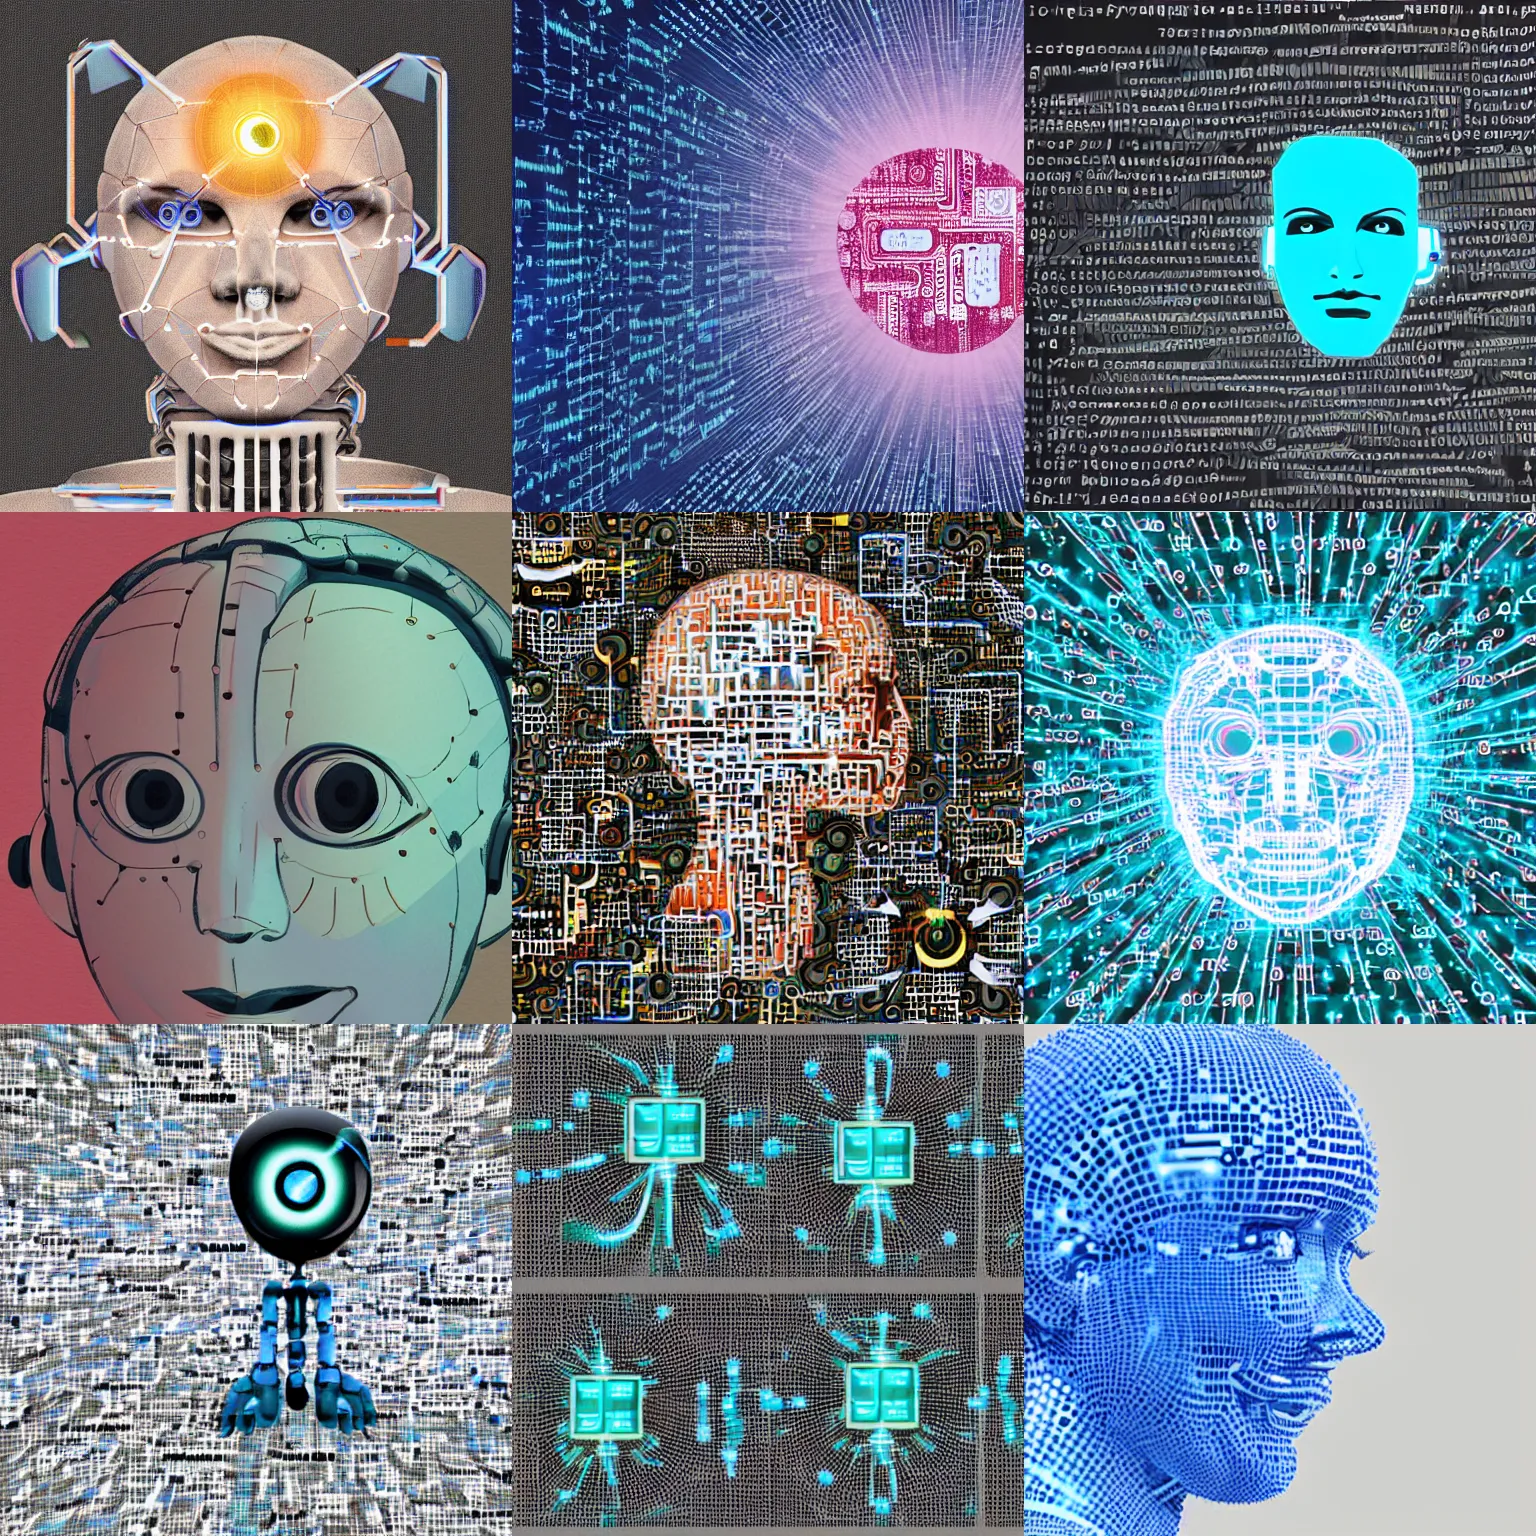 Prompt: < art created - by - ai > in defense of open source artificial intelligence < / art >